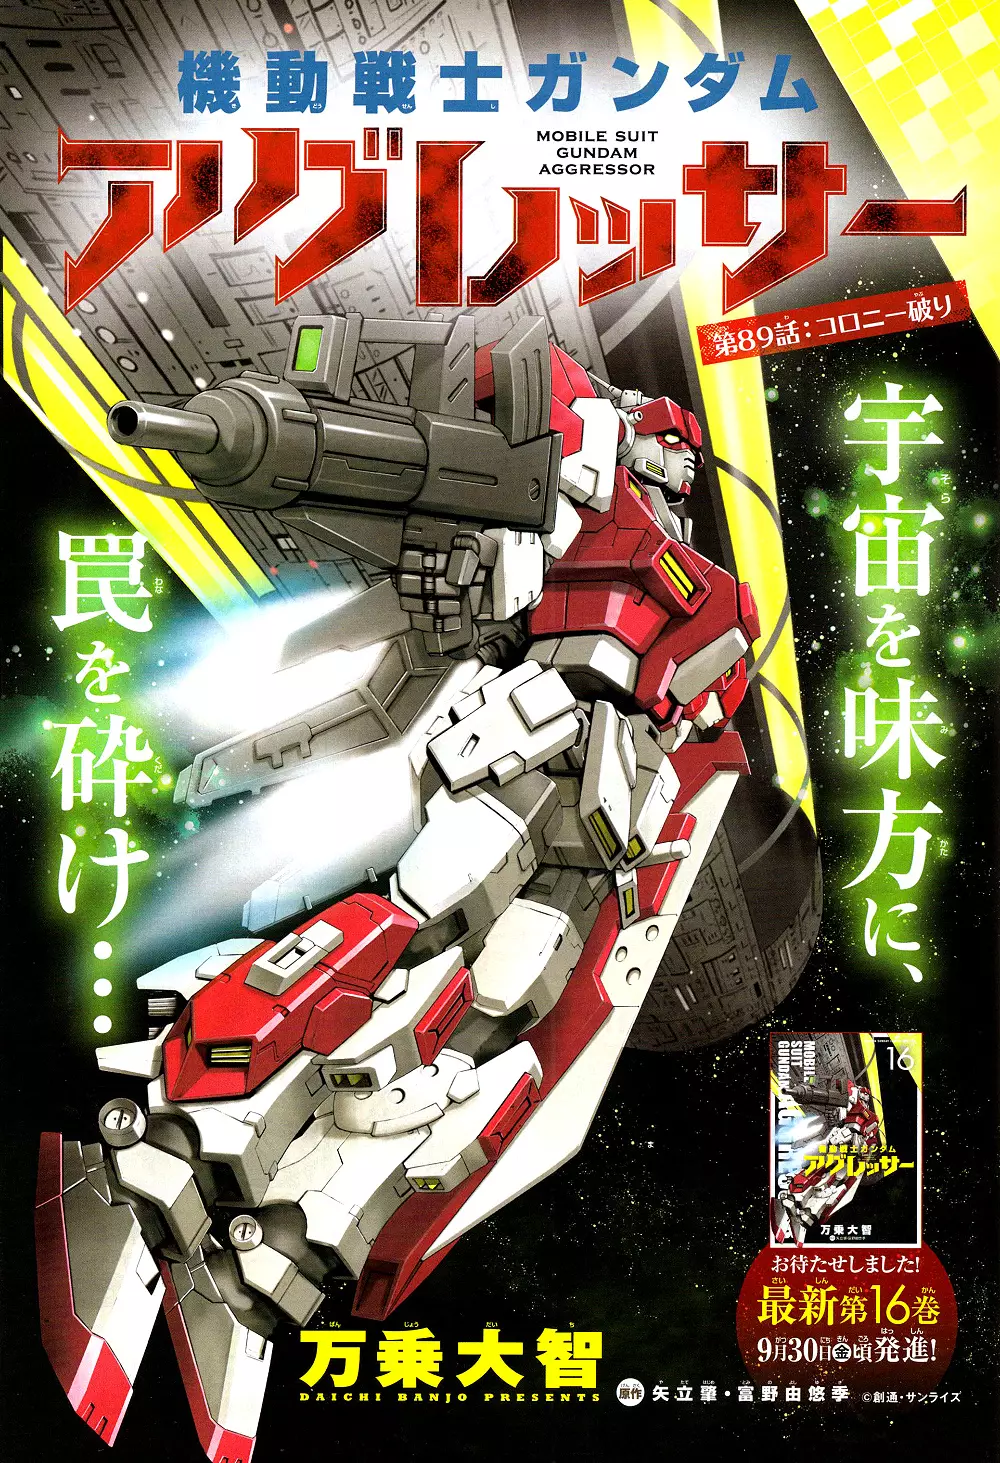 Mobile Suit Gundam Aggressor - 89 page 1-7ee600fd